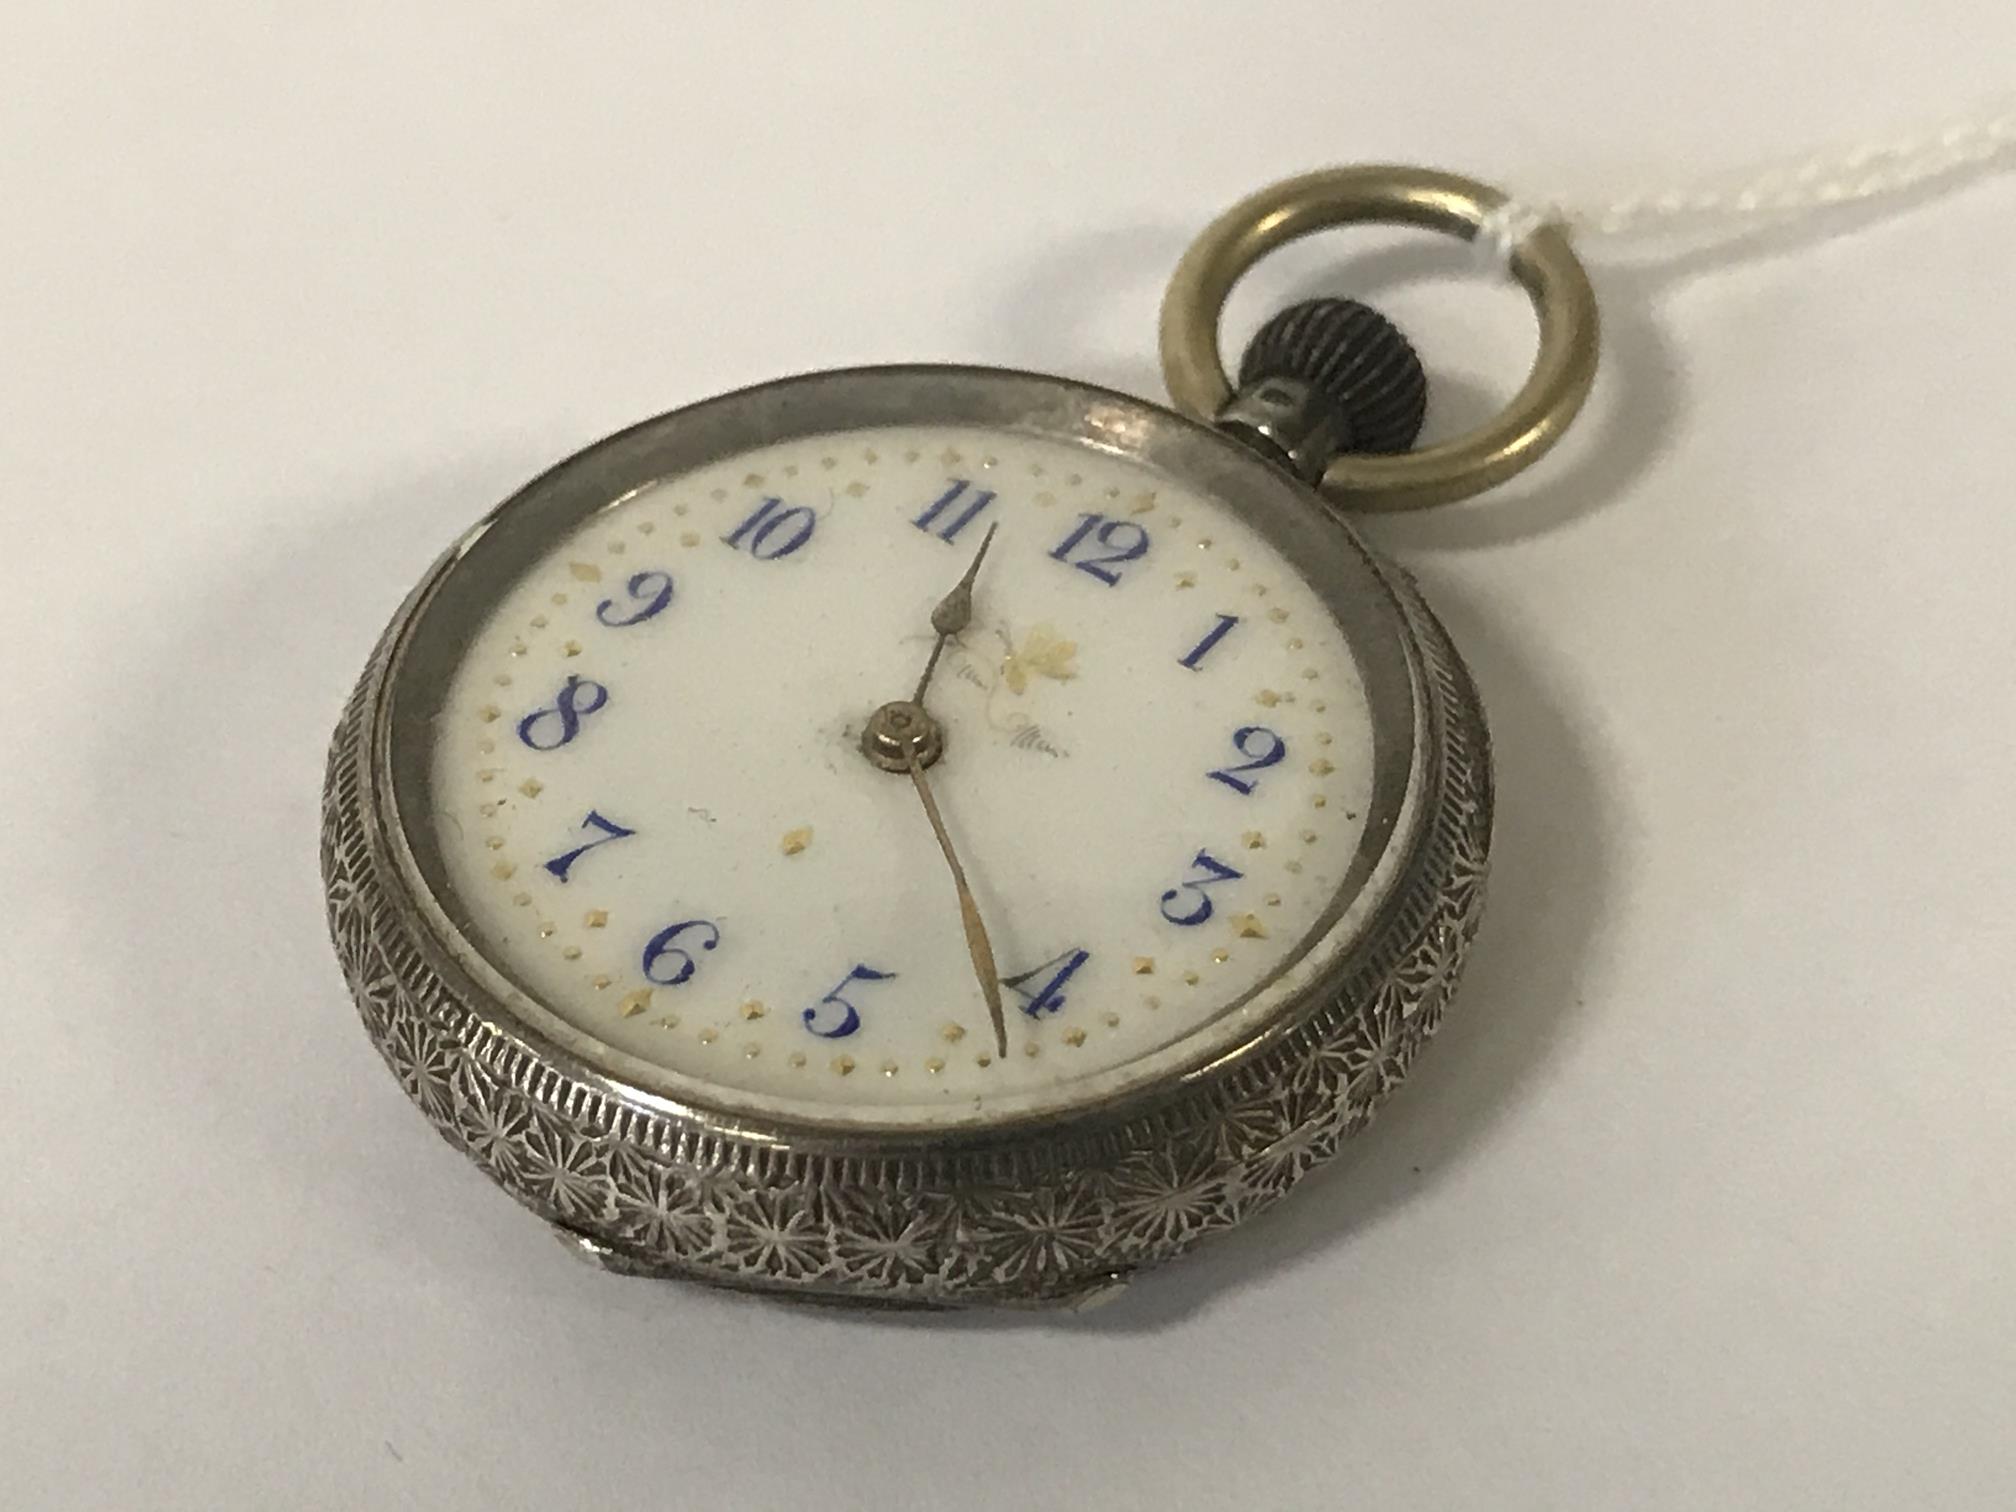 SILVER FOB WATCH - NEEDS A SERVICE